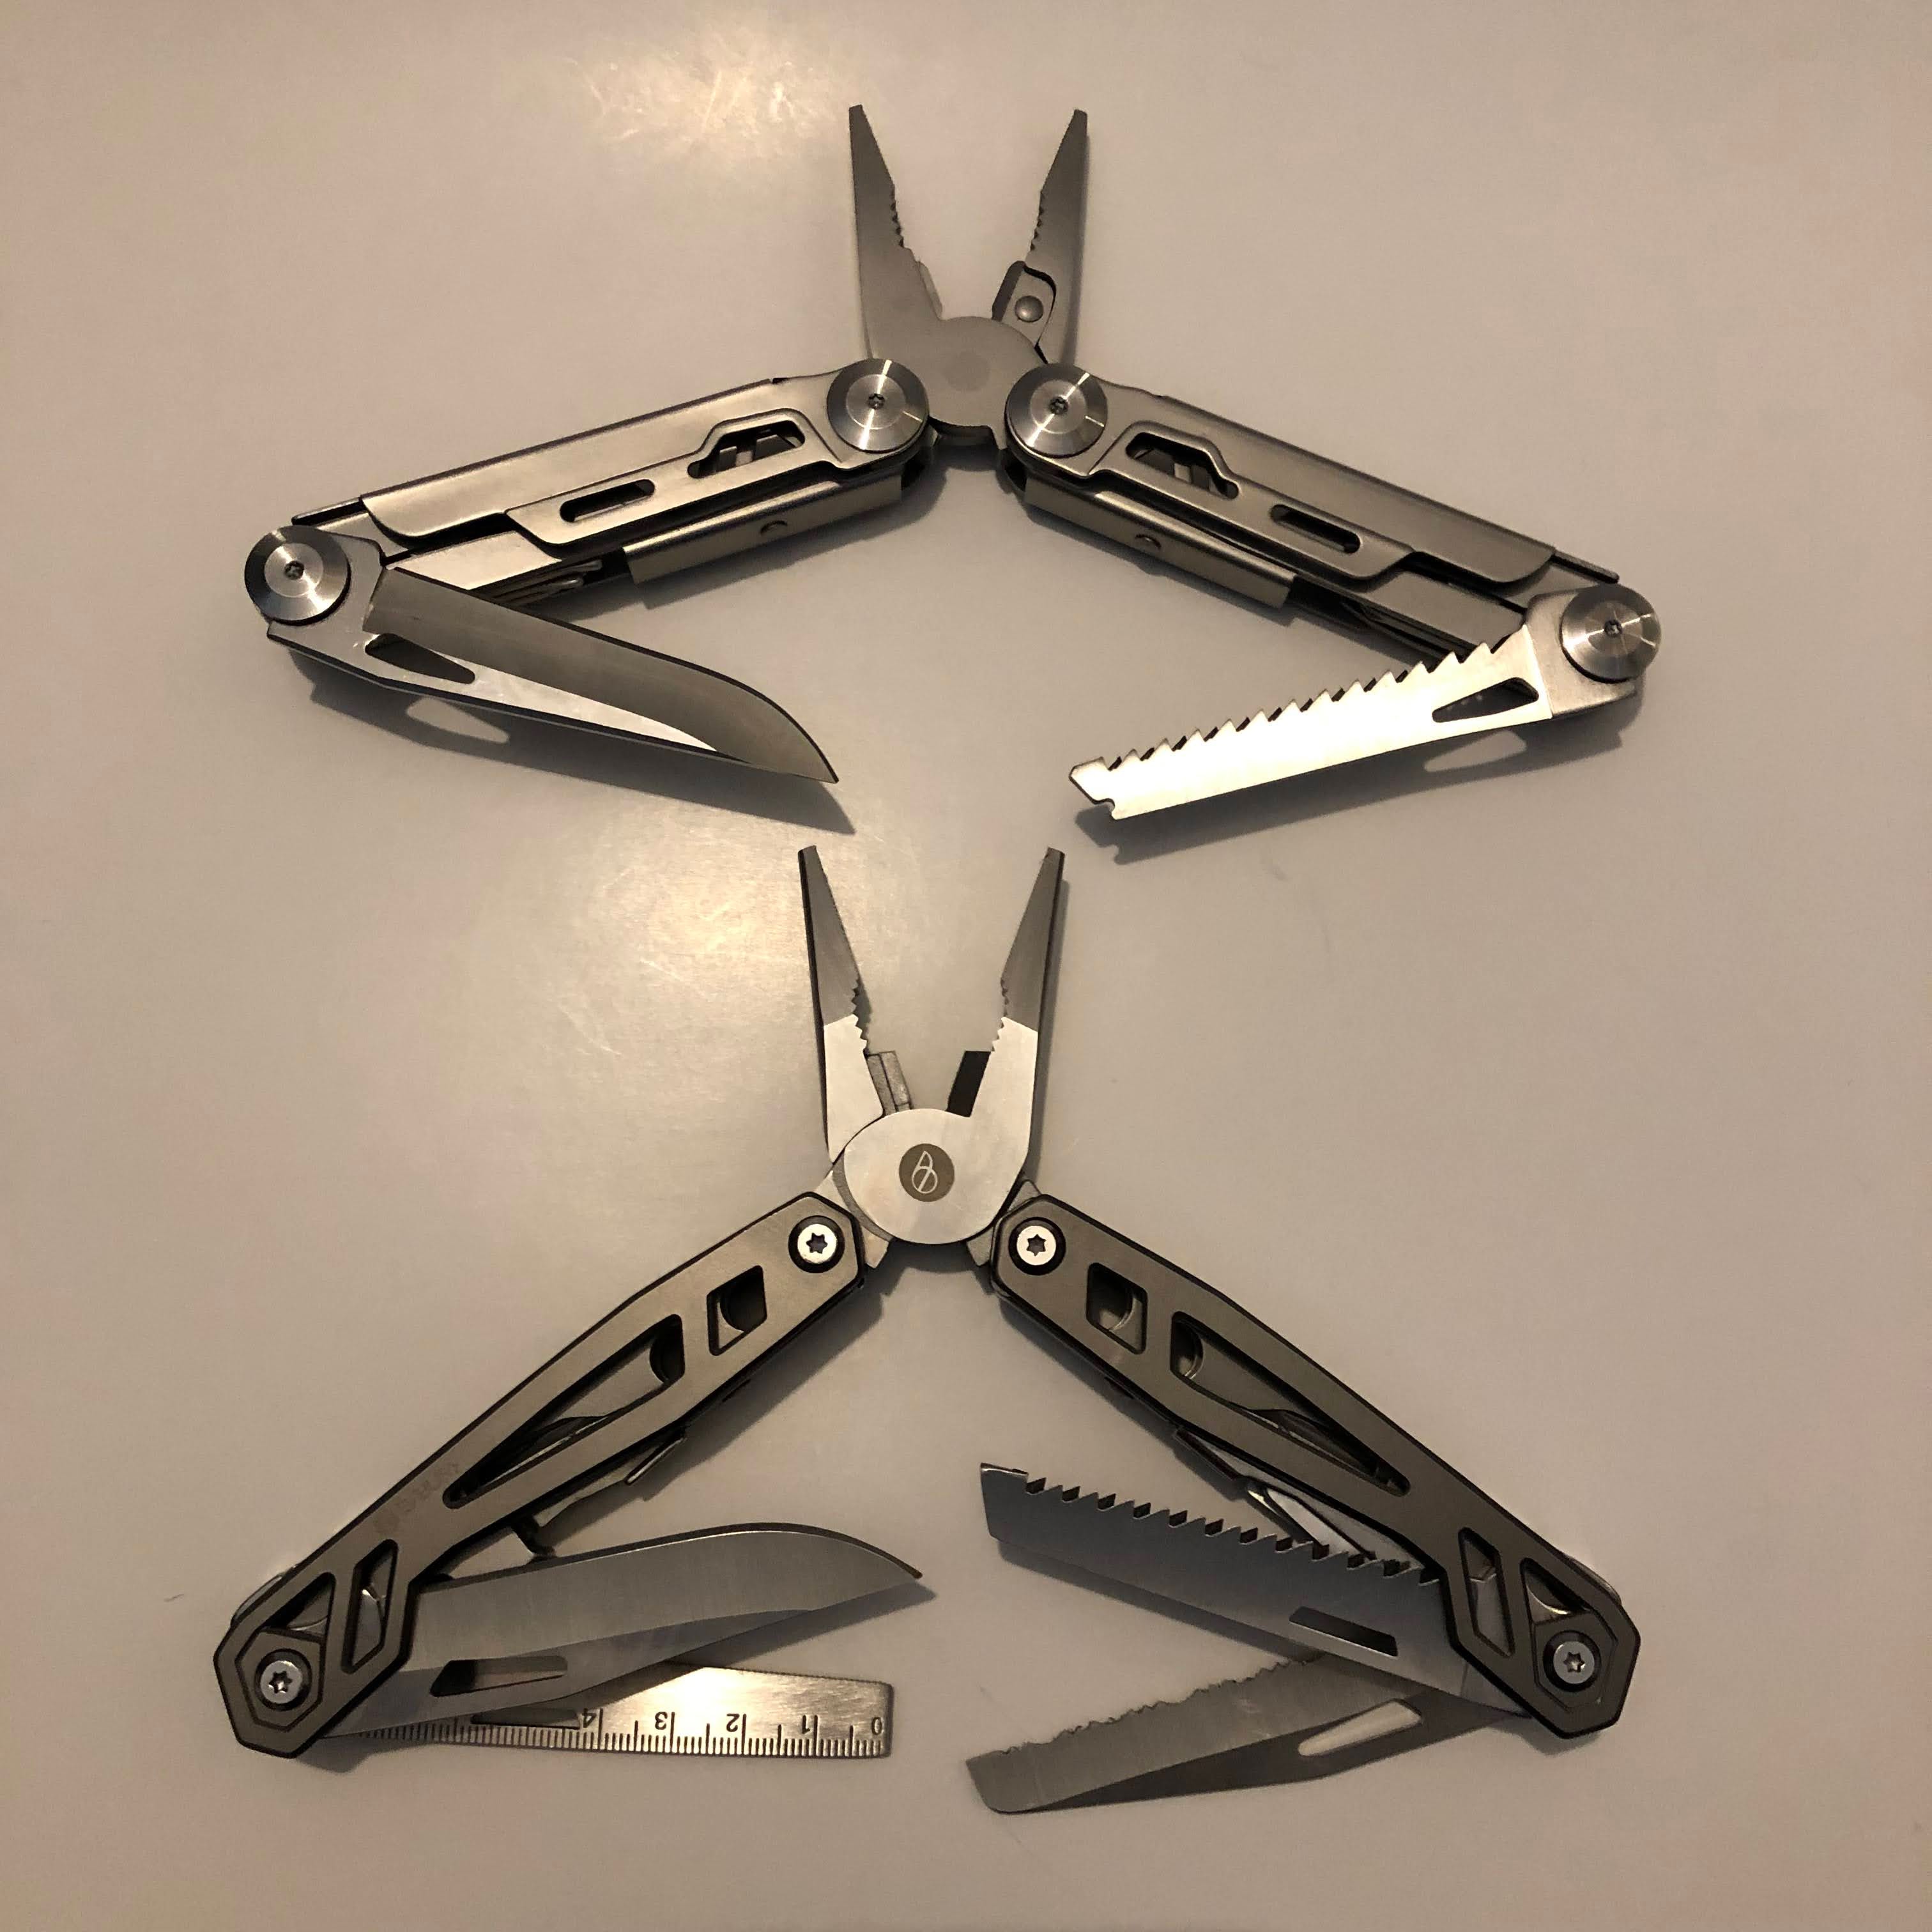 Unbranded Chinese Multi-tools Comparison and Comment About Leatherman and  Gerber